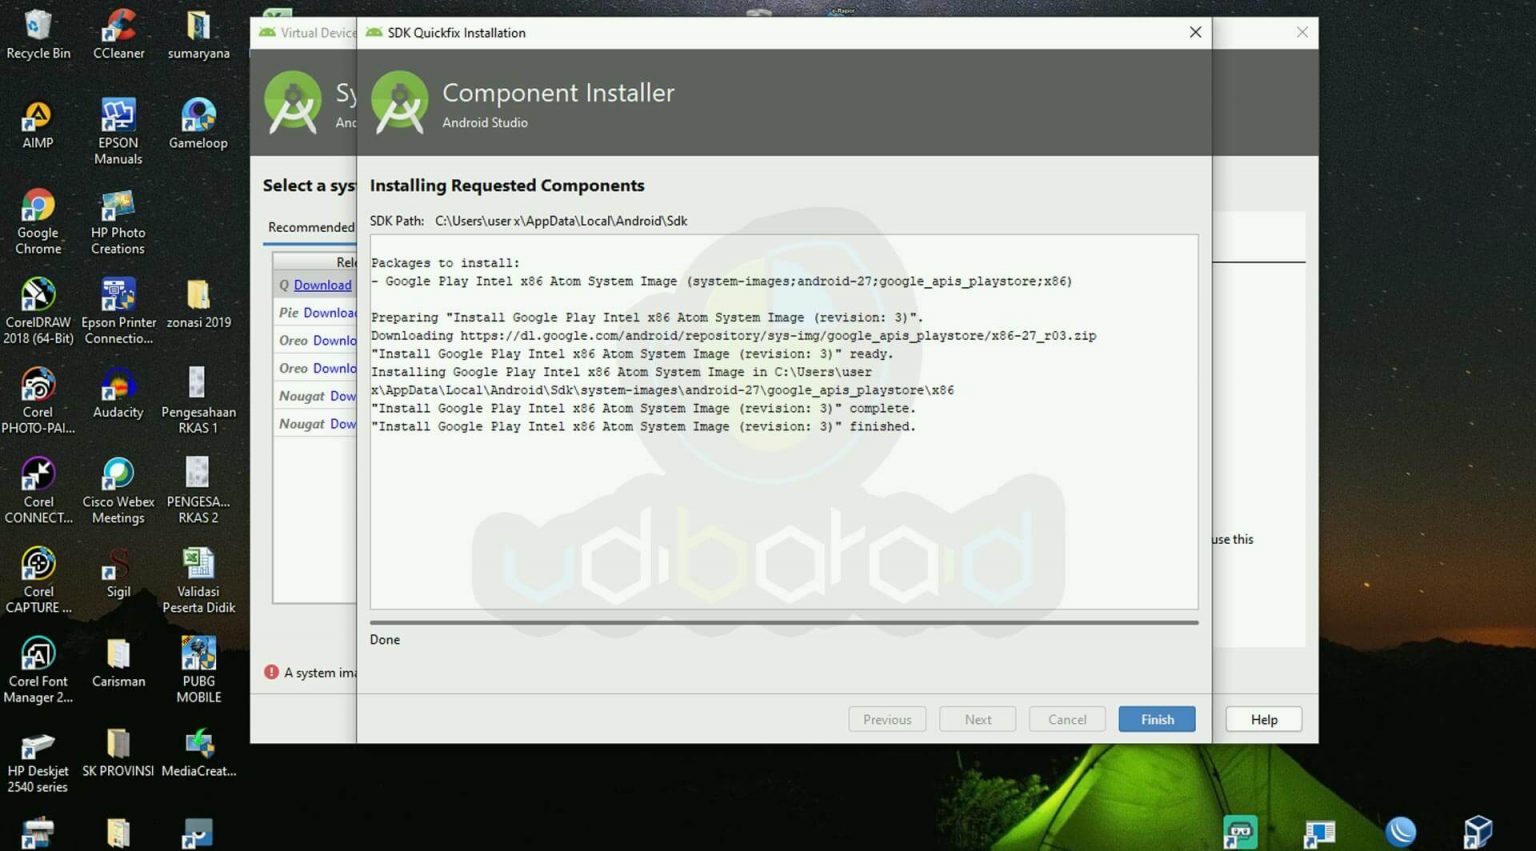 avd manager android studio